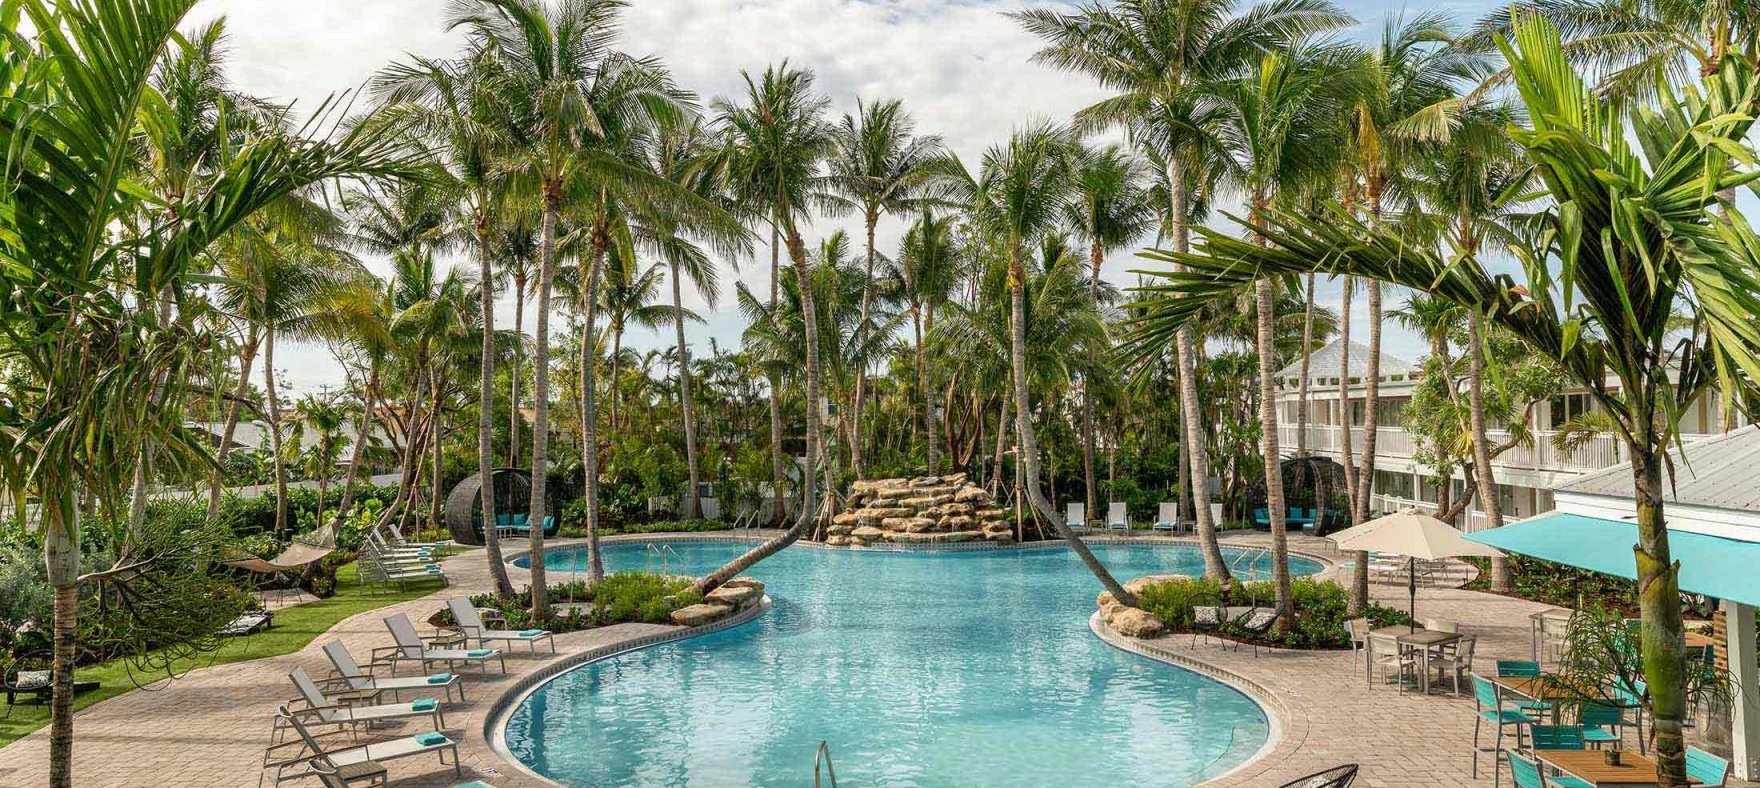 A long shot of the figure-eight swimming pool surrounded by palm trees